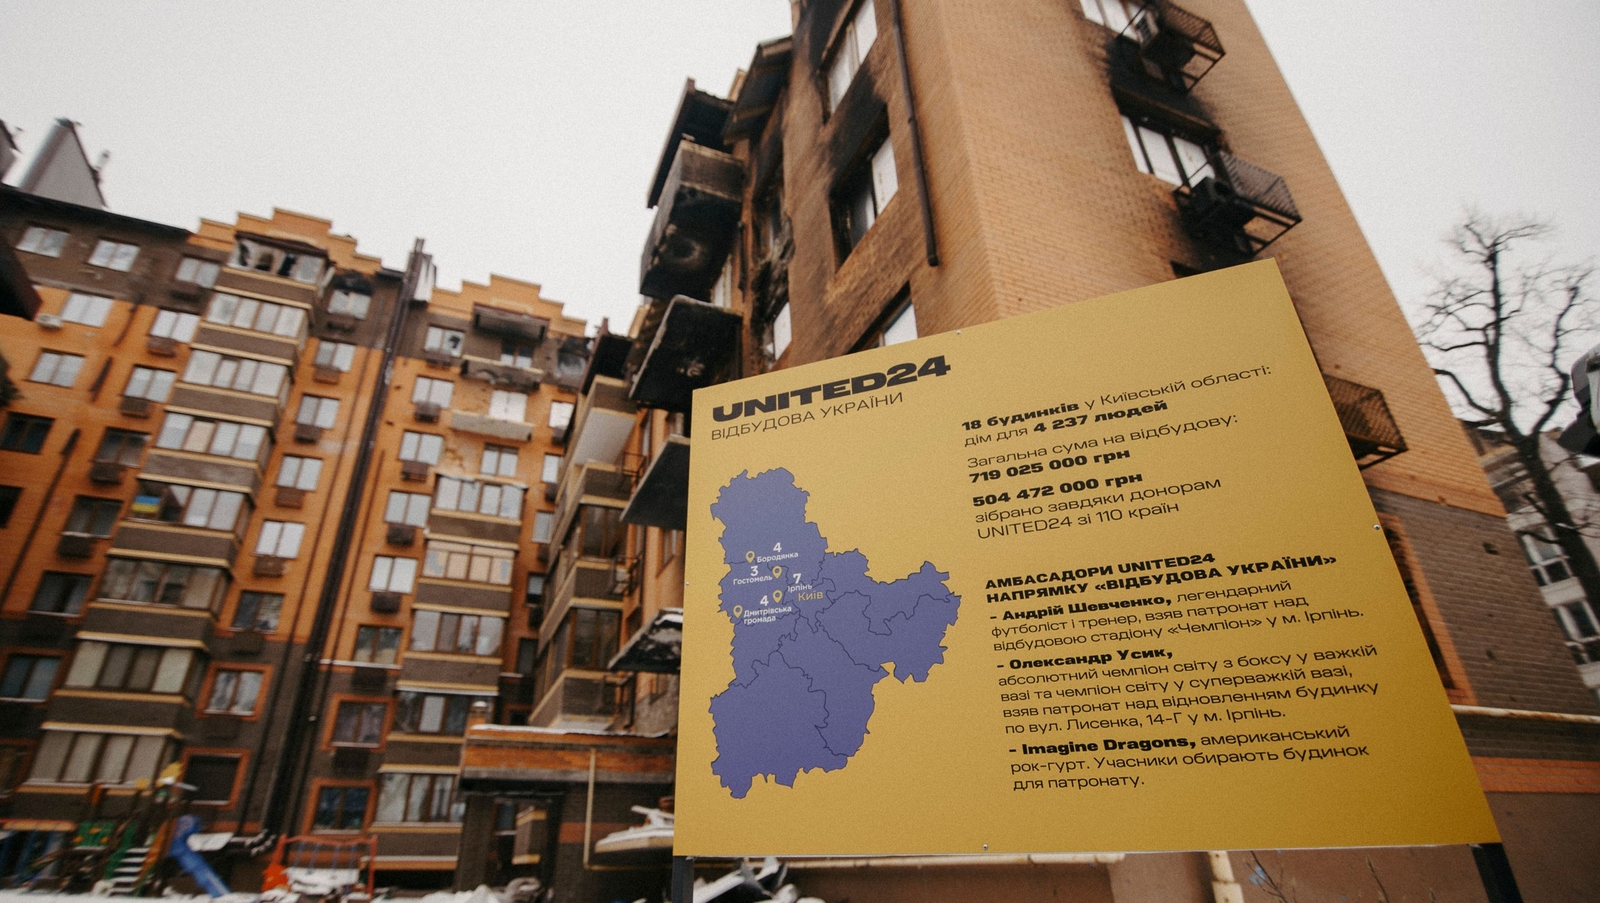 UNITED24 Launches the Rebuild Ukraine Program. The First Project will be the Restoration of 18 Apartment Buildings in Kyiv Oblast